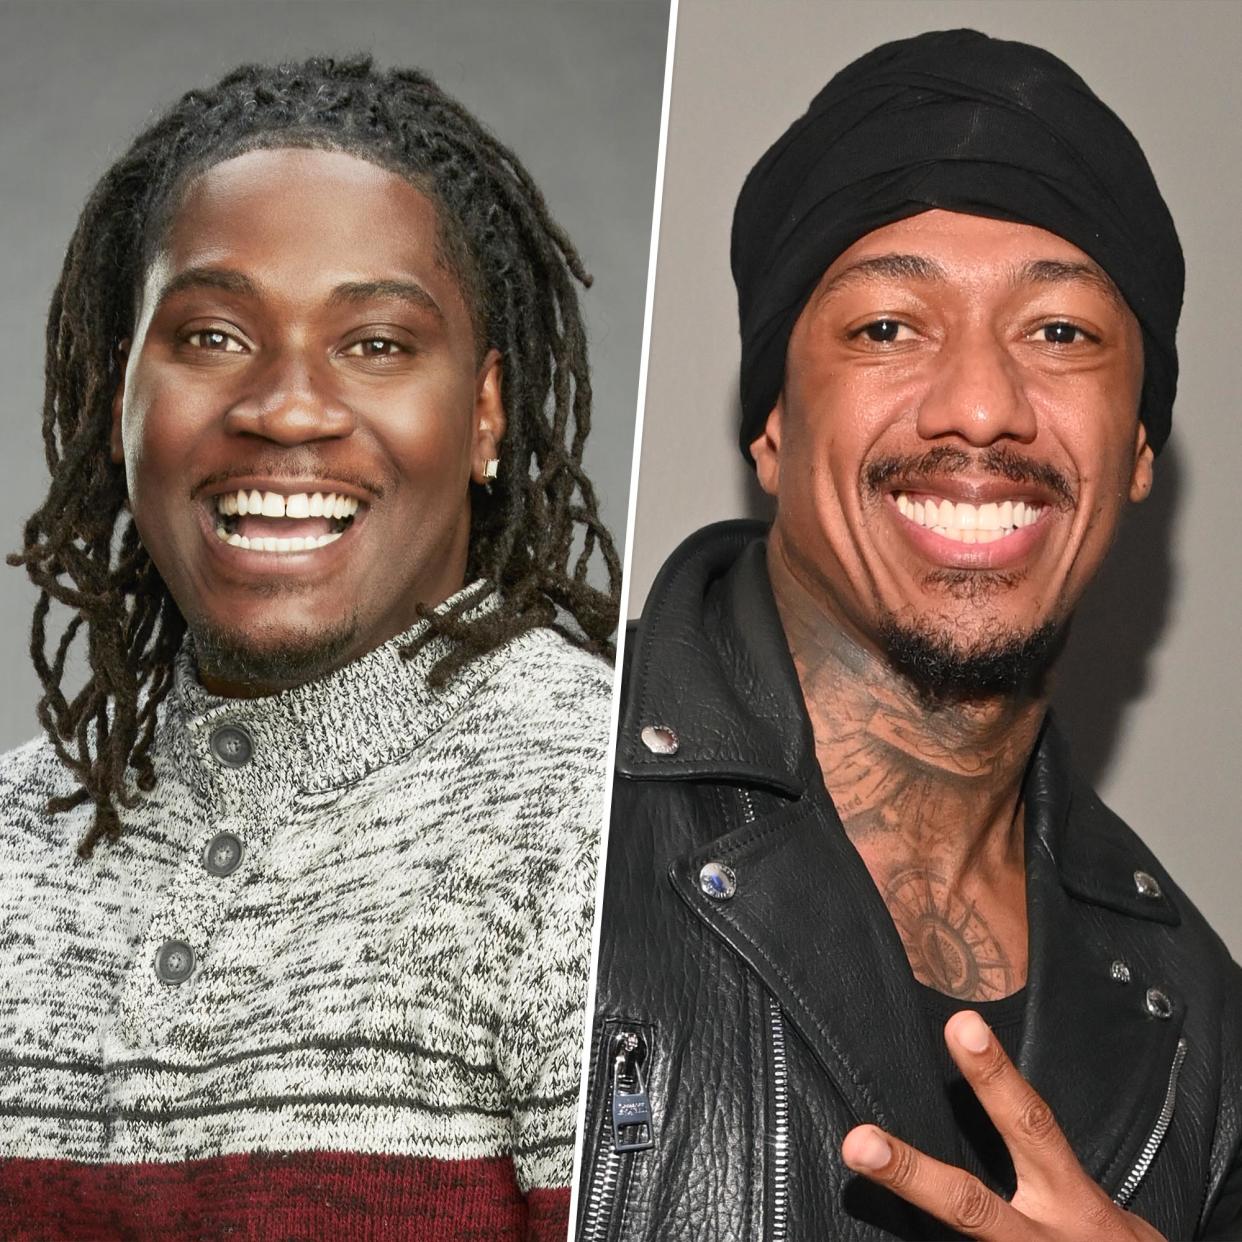 Gabriel Cannon, Nick Cannon (ABC, Getty Images)